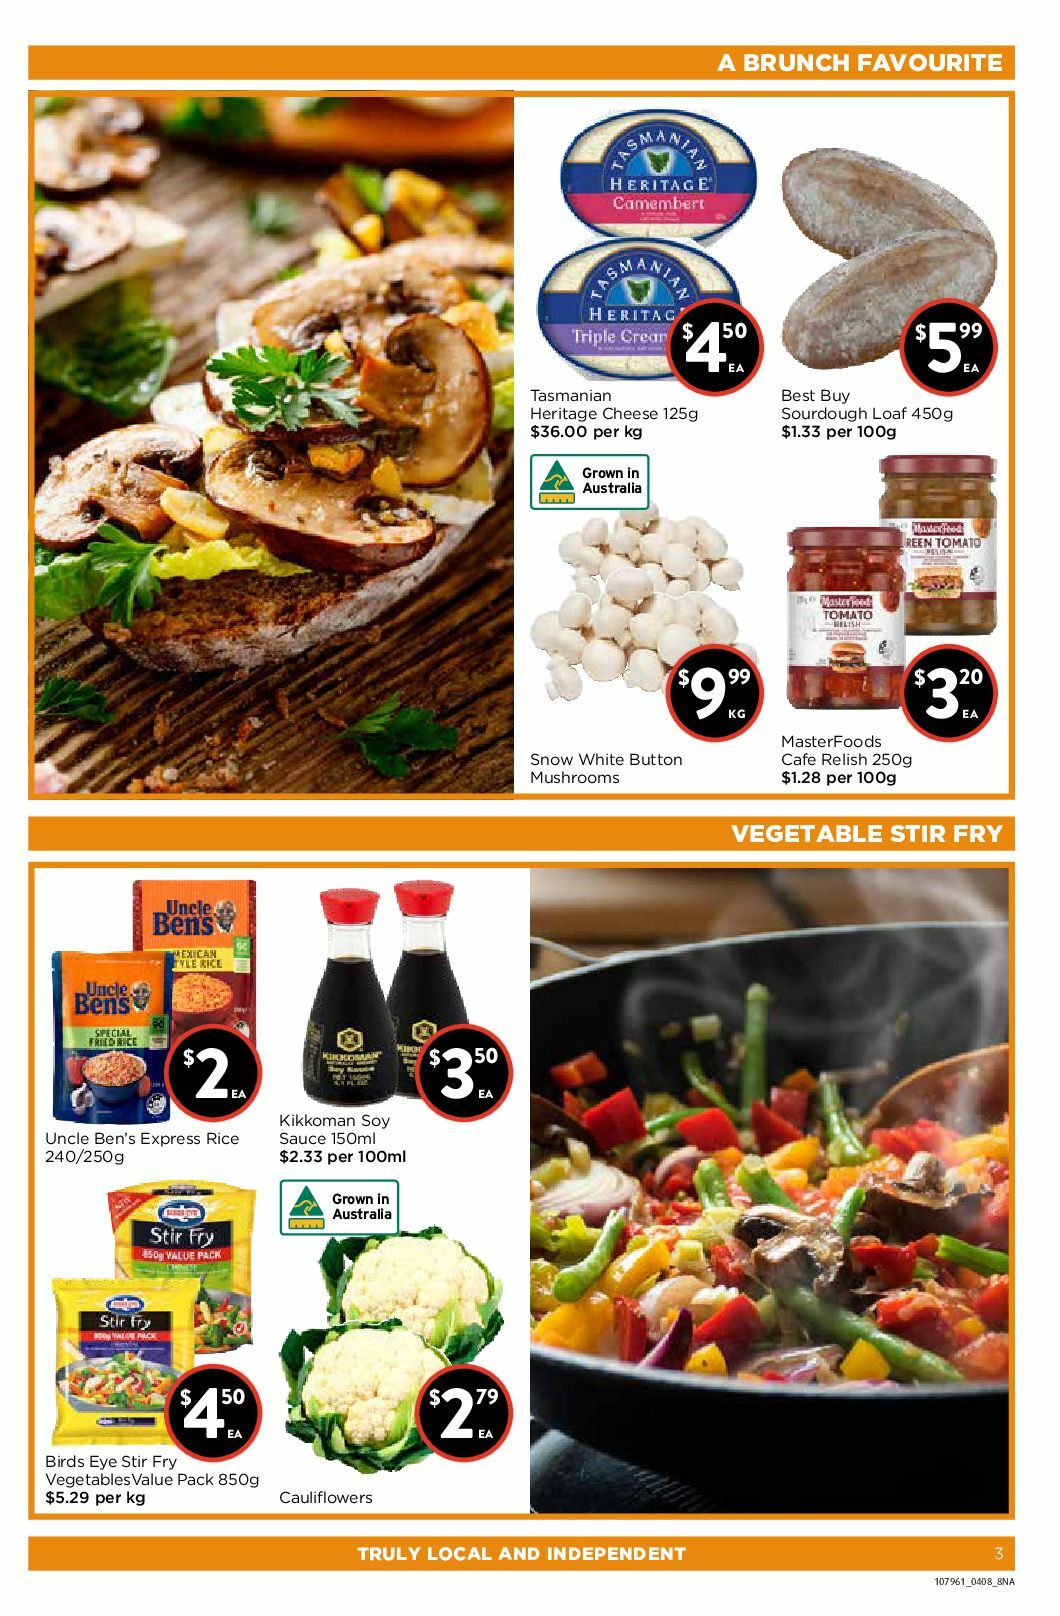 FoodWorks Catalogues from 4 August